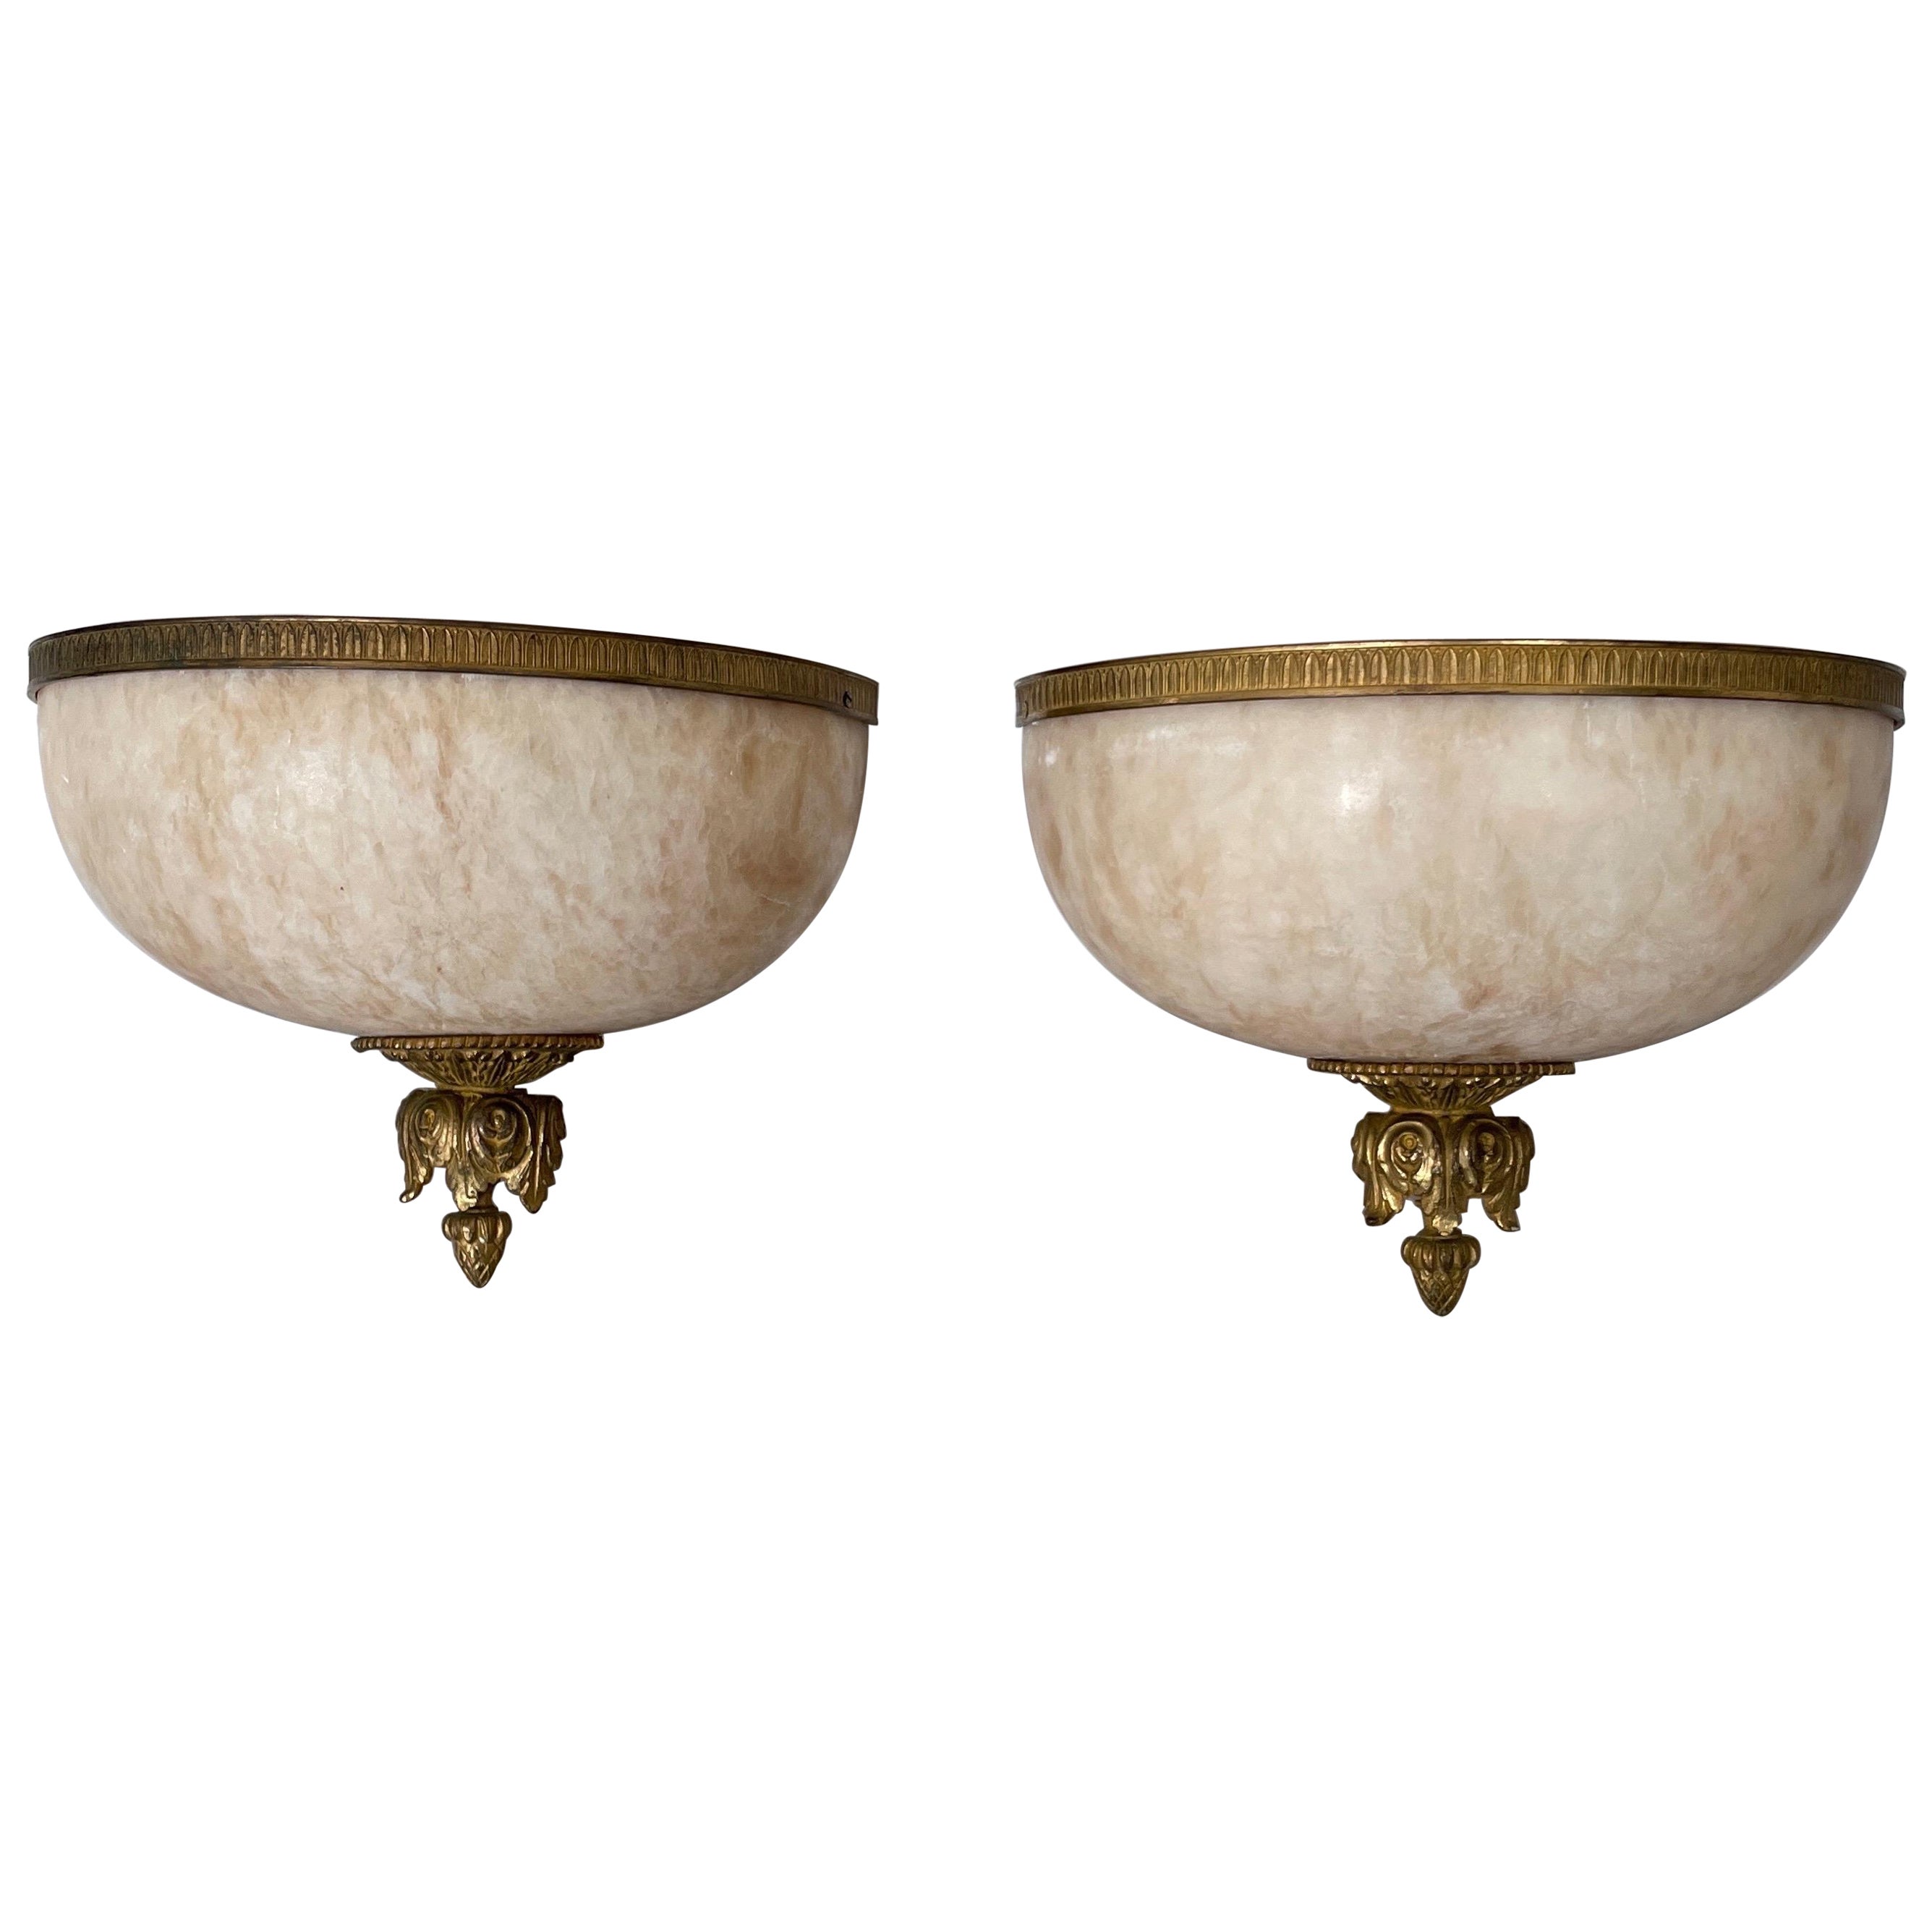 Pair of Neoclassical French Alabaster & Bronze Wall Mounted Sconces For Sale